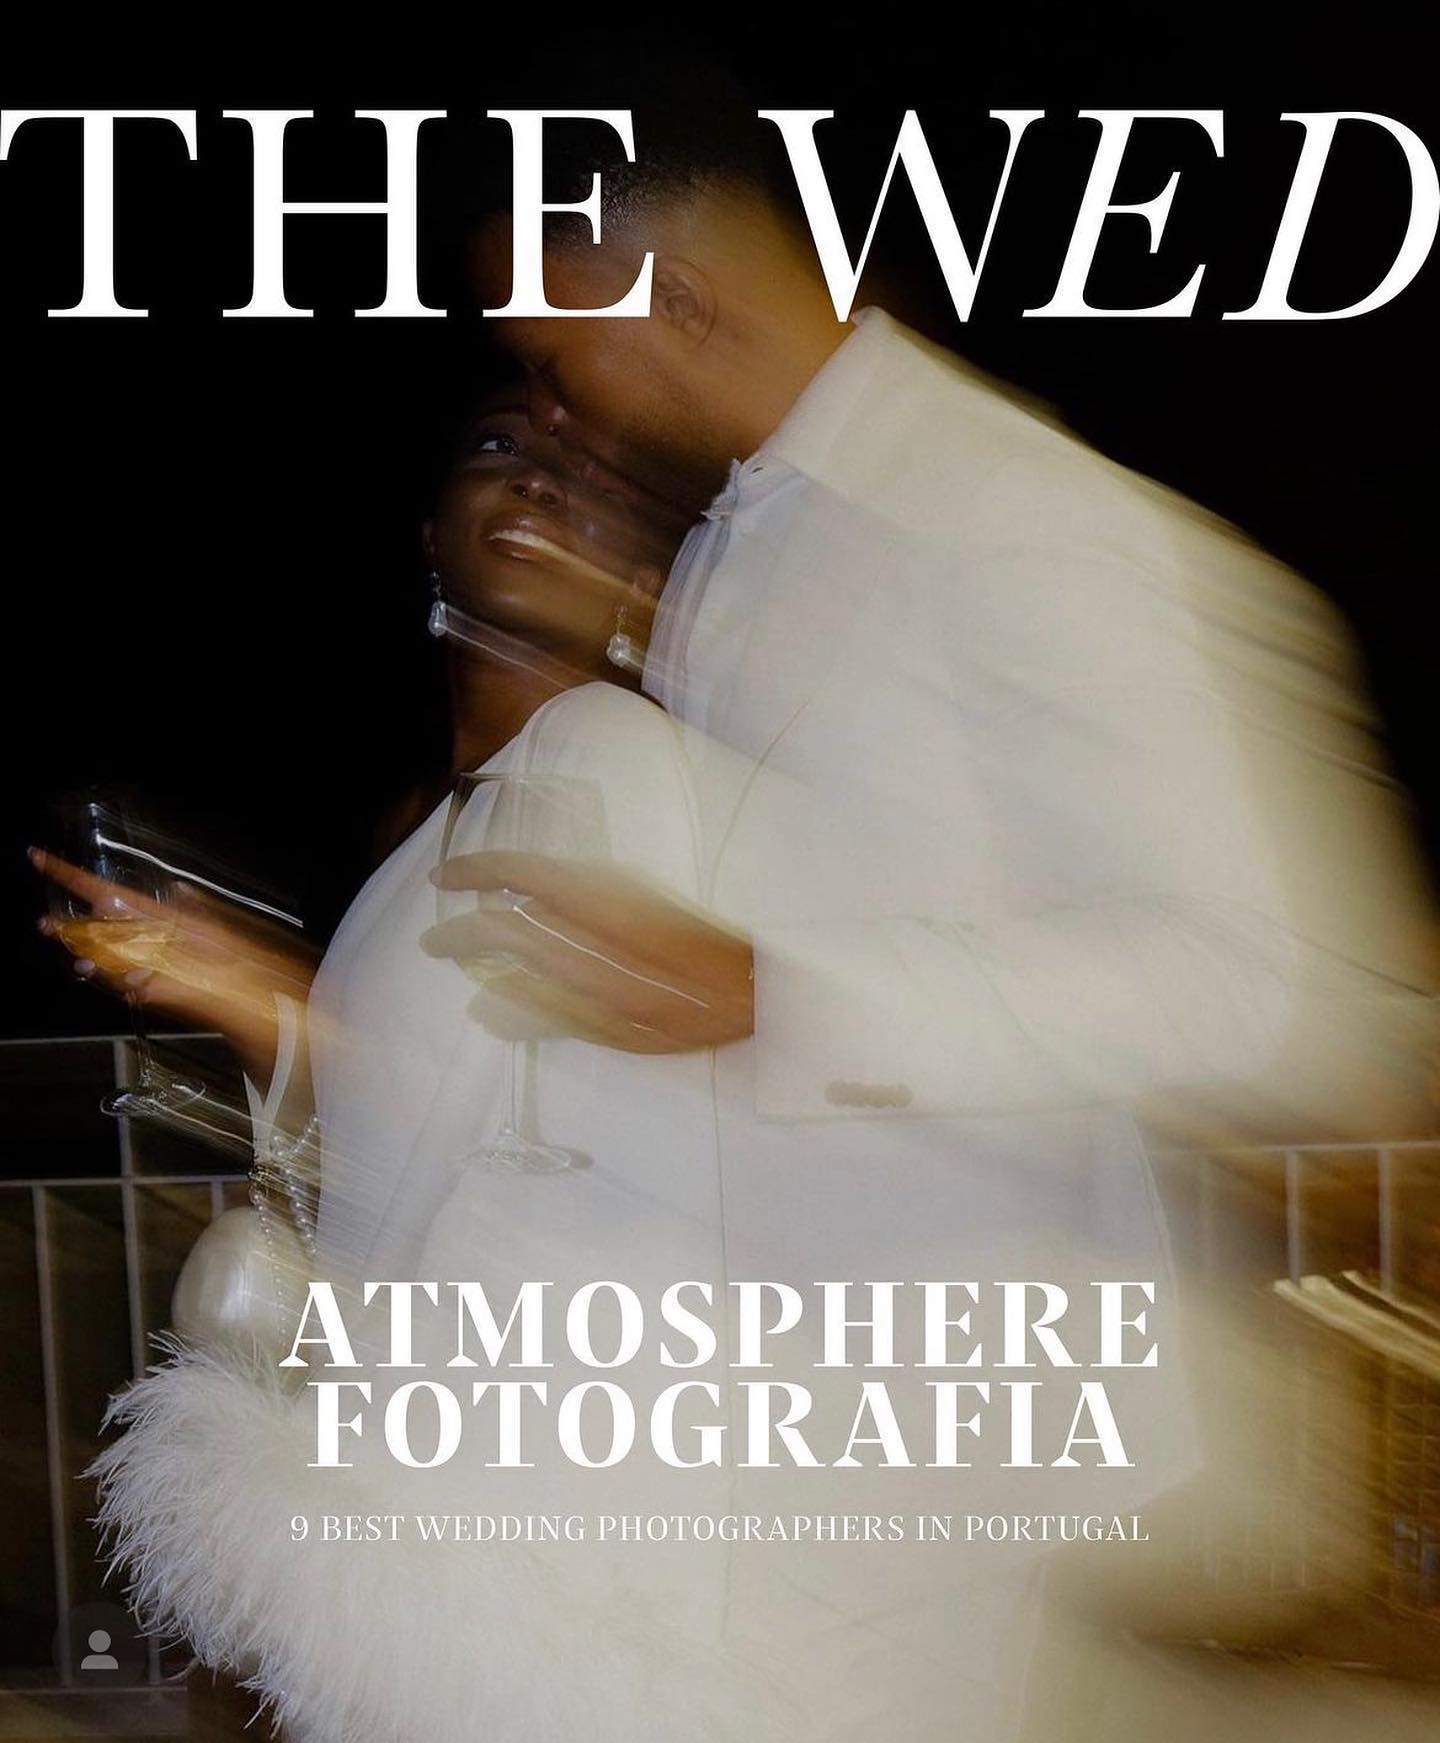 We were recently included in the best 9 wedding photographers in Portugal list by @thewed after being named one of the b